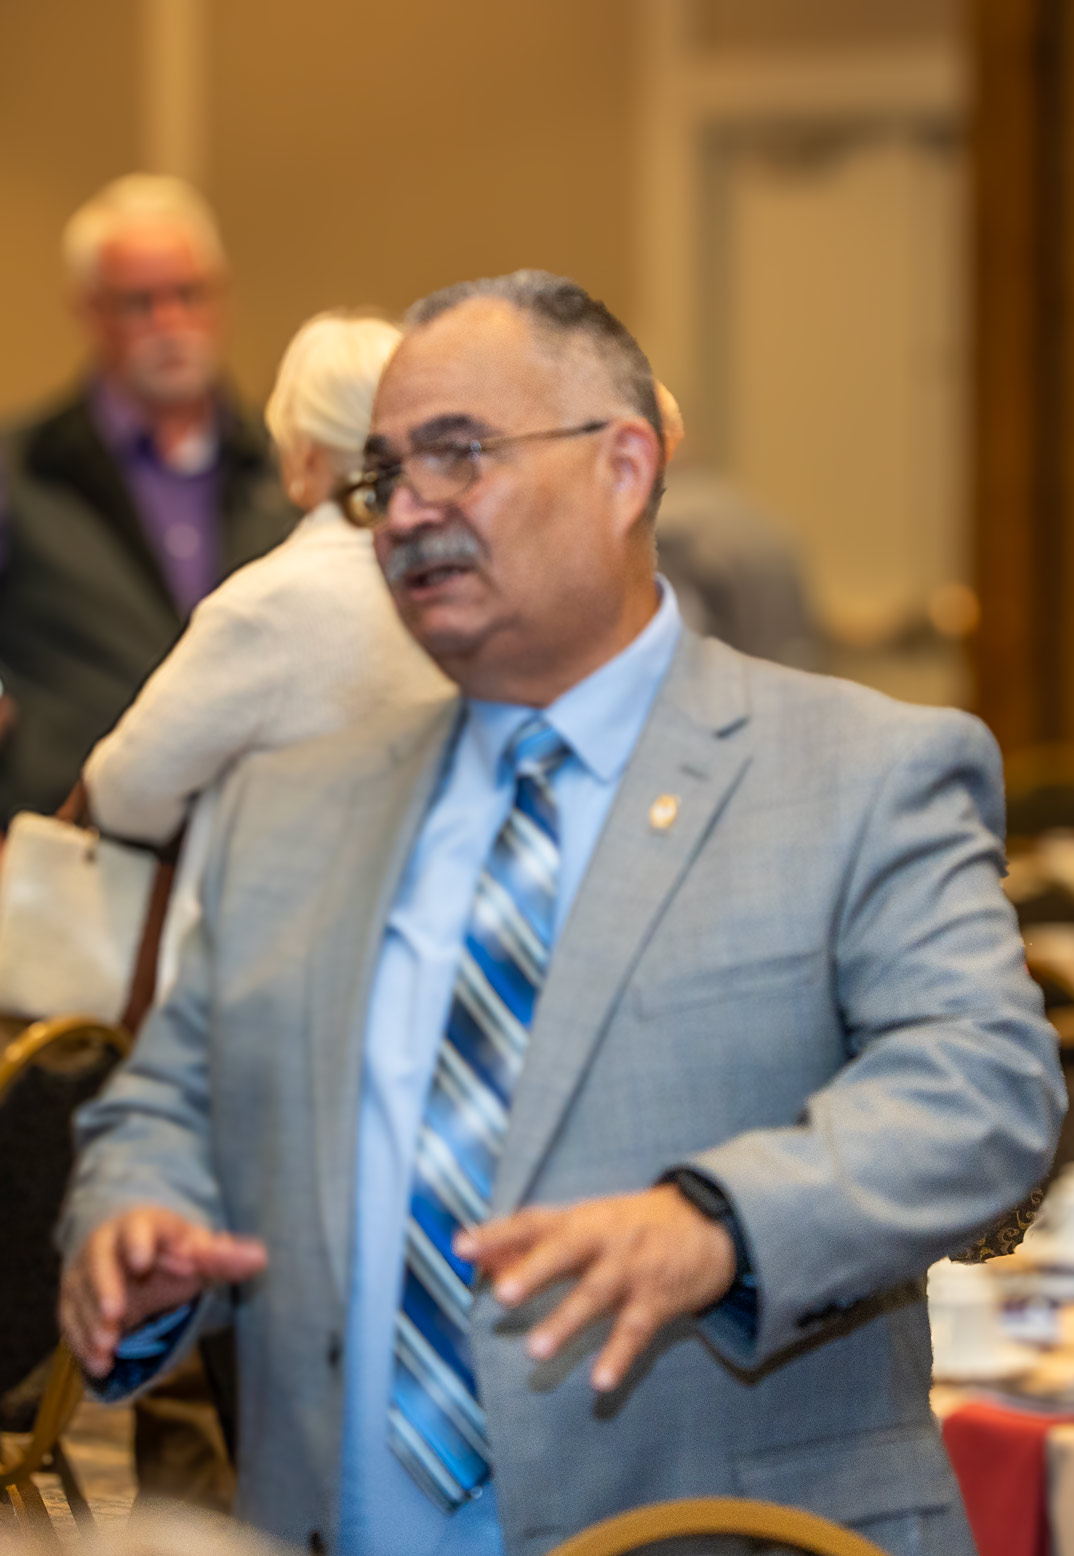 Community Builders Breakfast honored guest speaker and one of Habitat's latest new home owners, Luis Saldivar. Latin American male, greying hair, grey mustache, glasses, light blue suit jacket, shirt and tie.